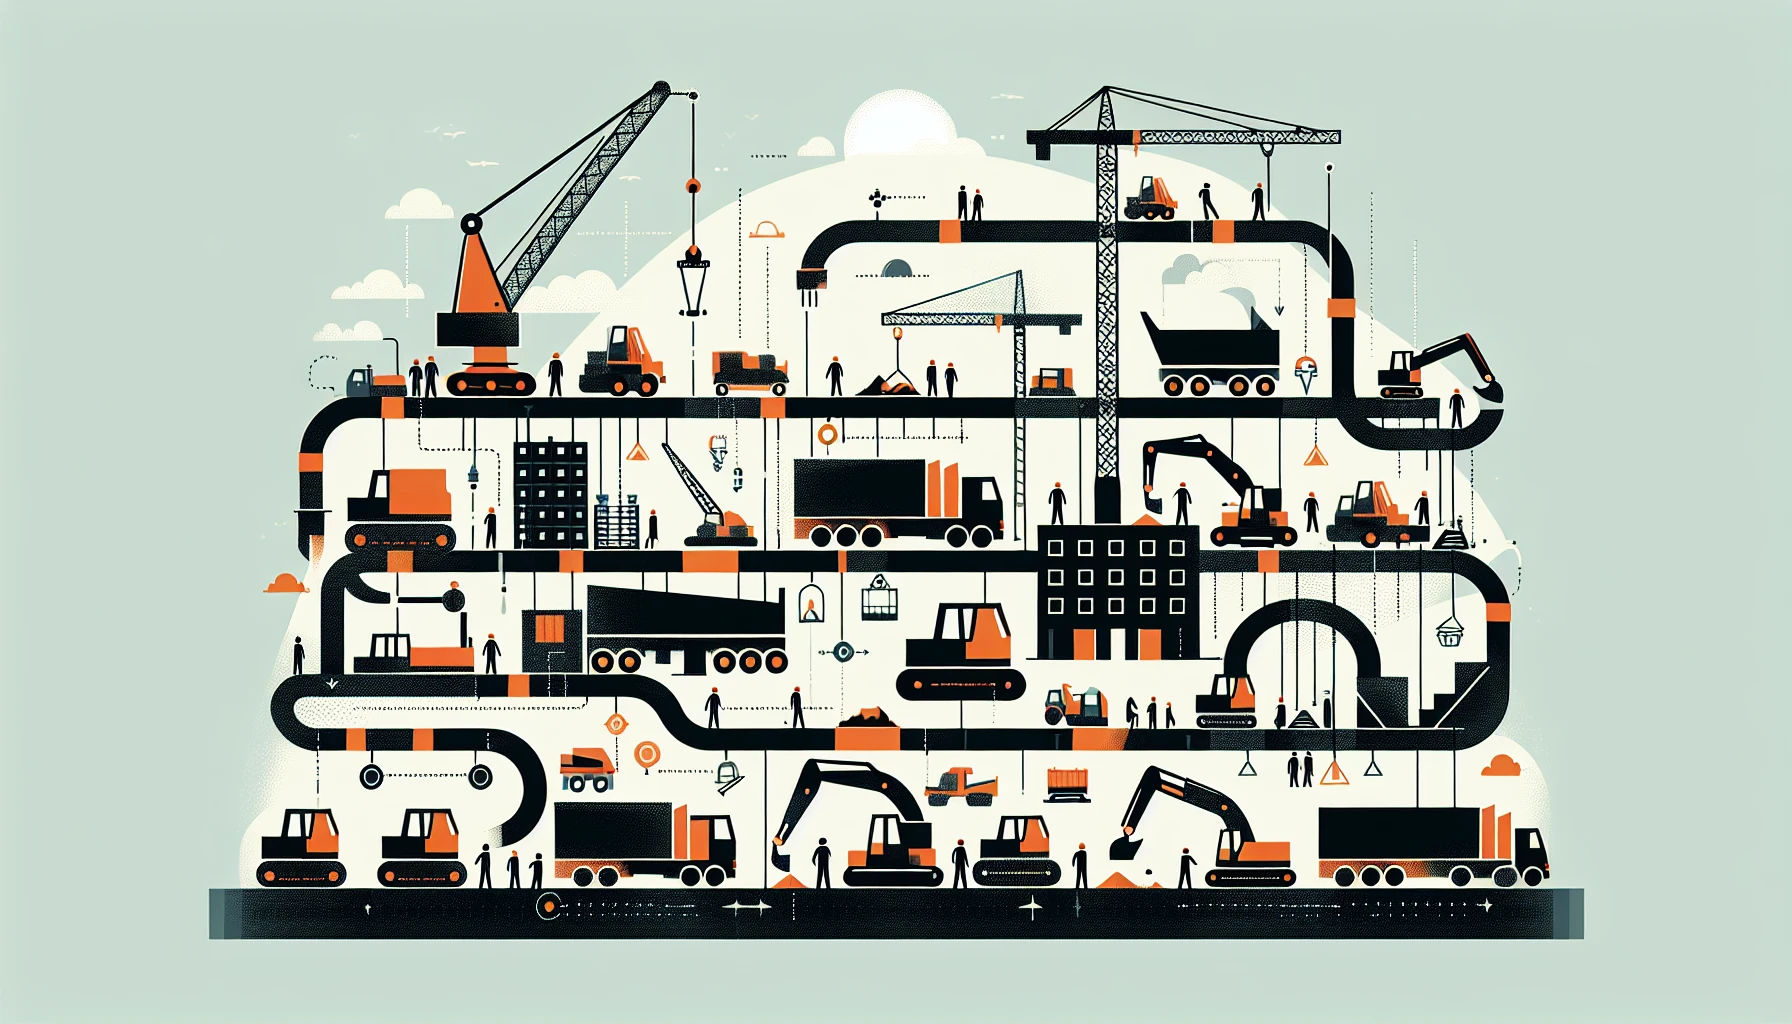 Construction site management system illustration with cranes and trucks